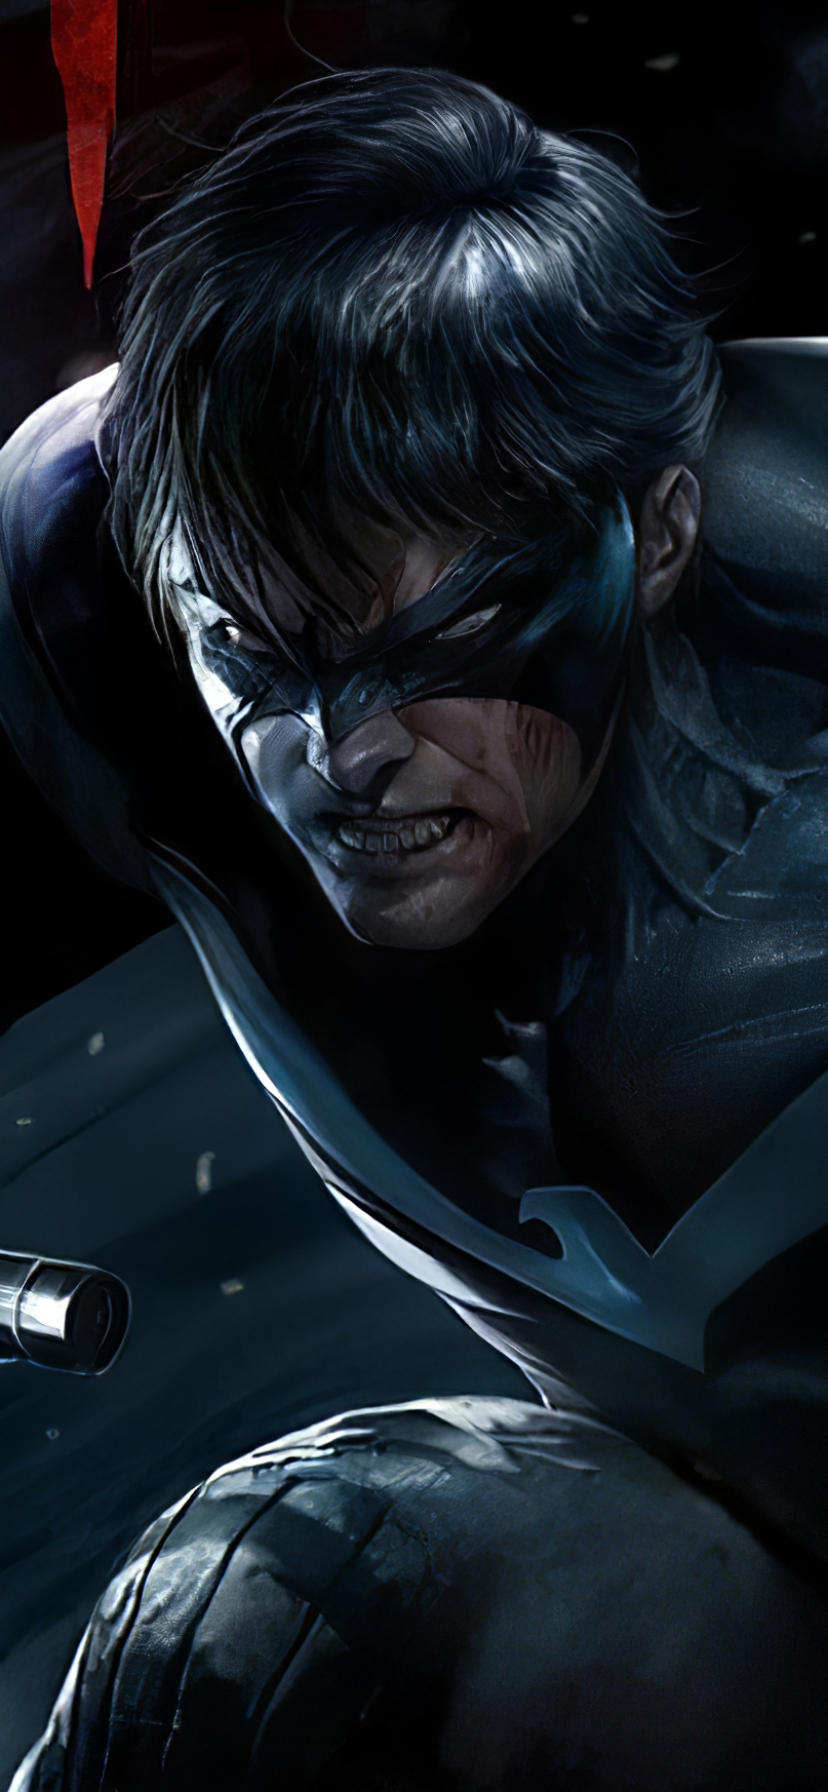 Download Nightwing wallpapers for mobile phone free Nightwing HD  pictures